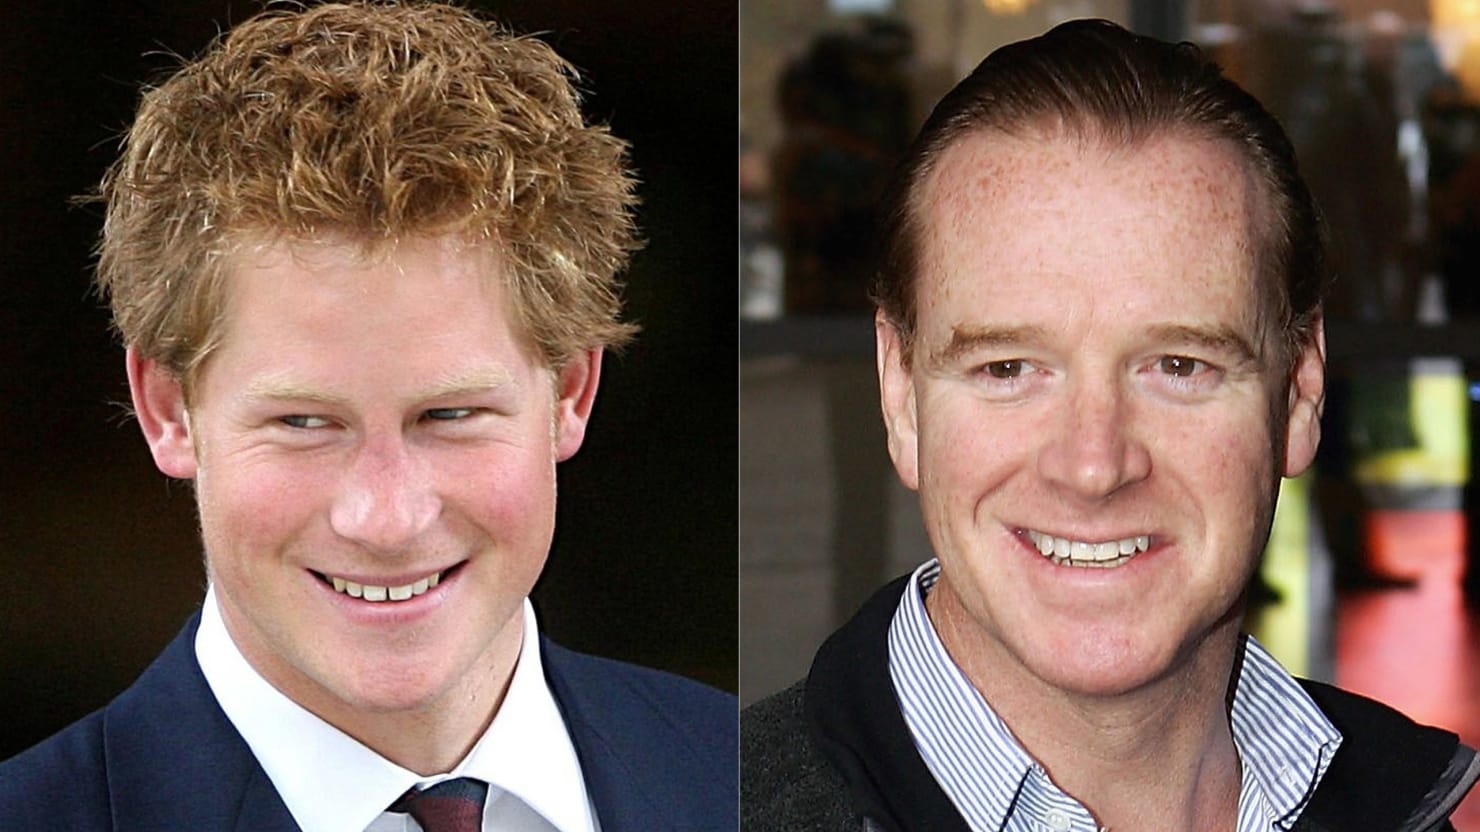 Report: Prince Harry Definitely Not James Hewitt's Son According To DN...